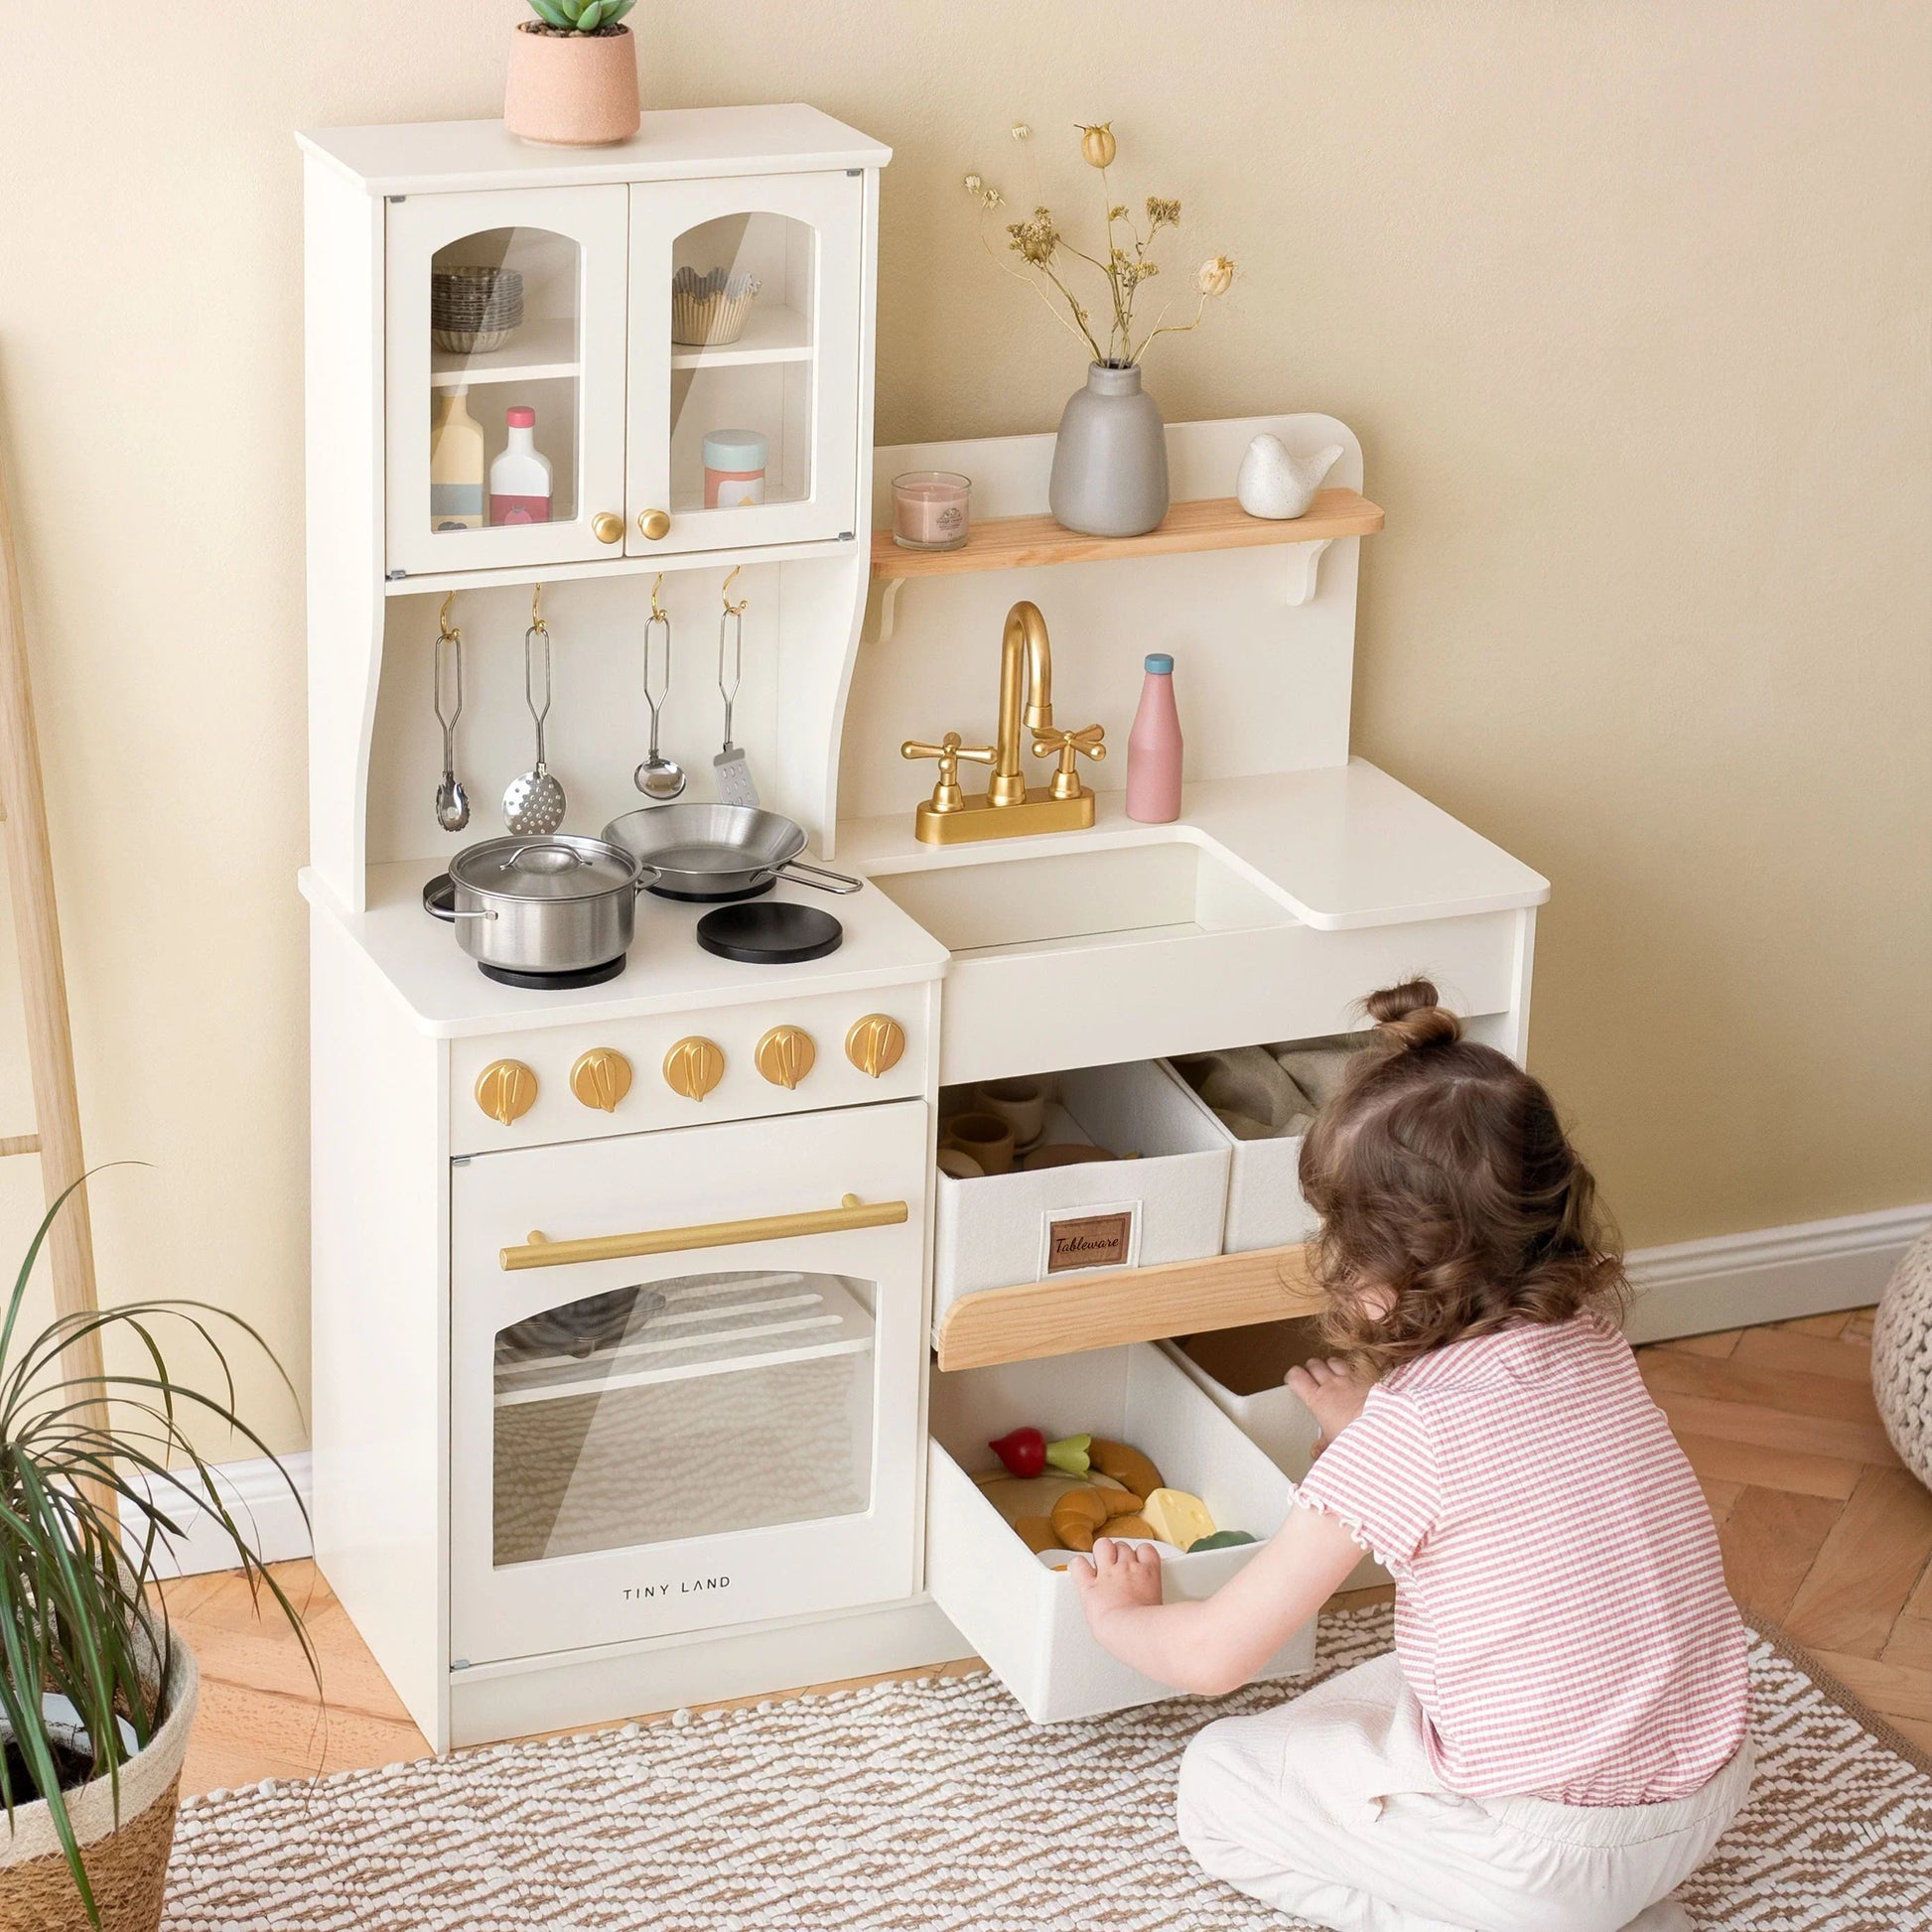 THE BEST GUIDE FOR CREATING A MONTESSORI KITCHEN